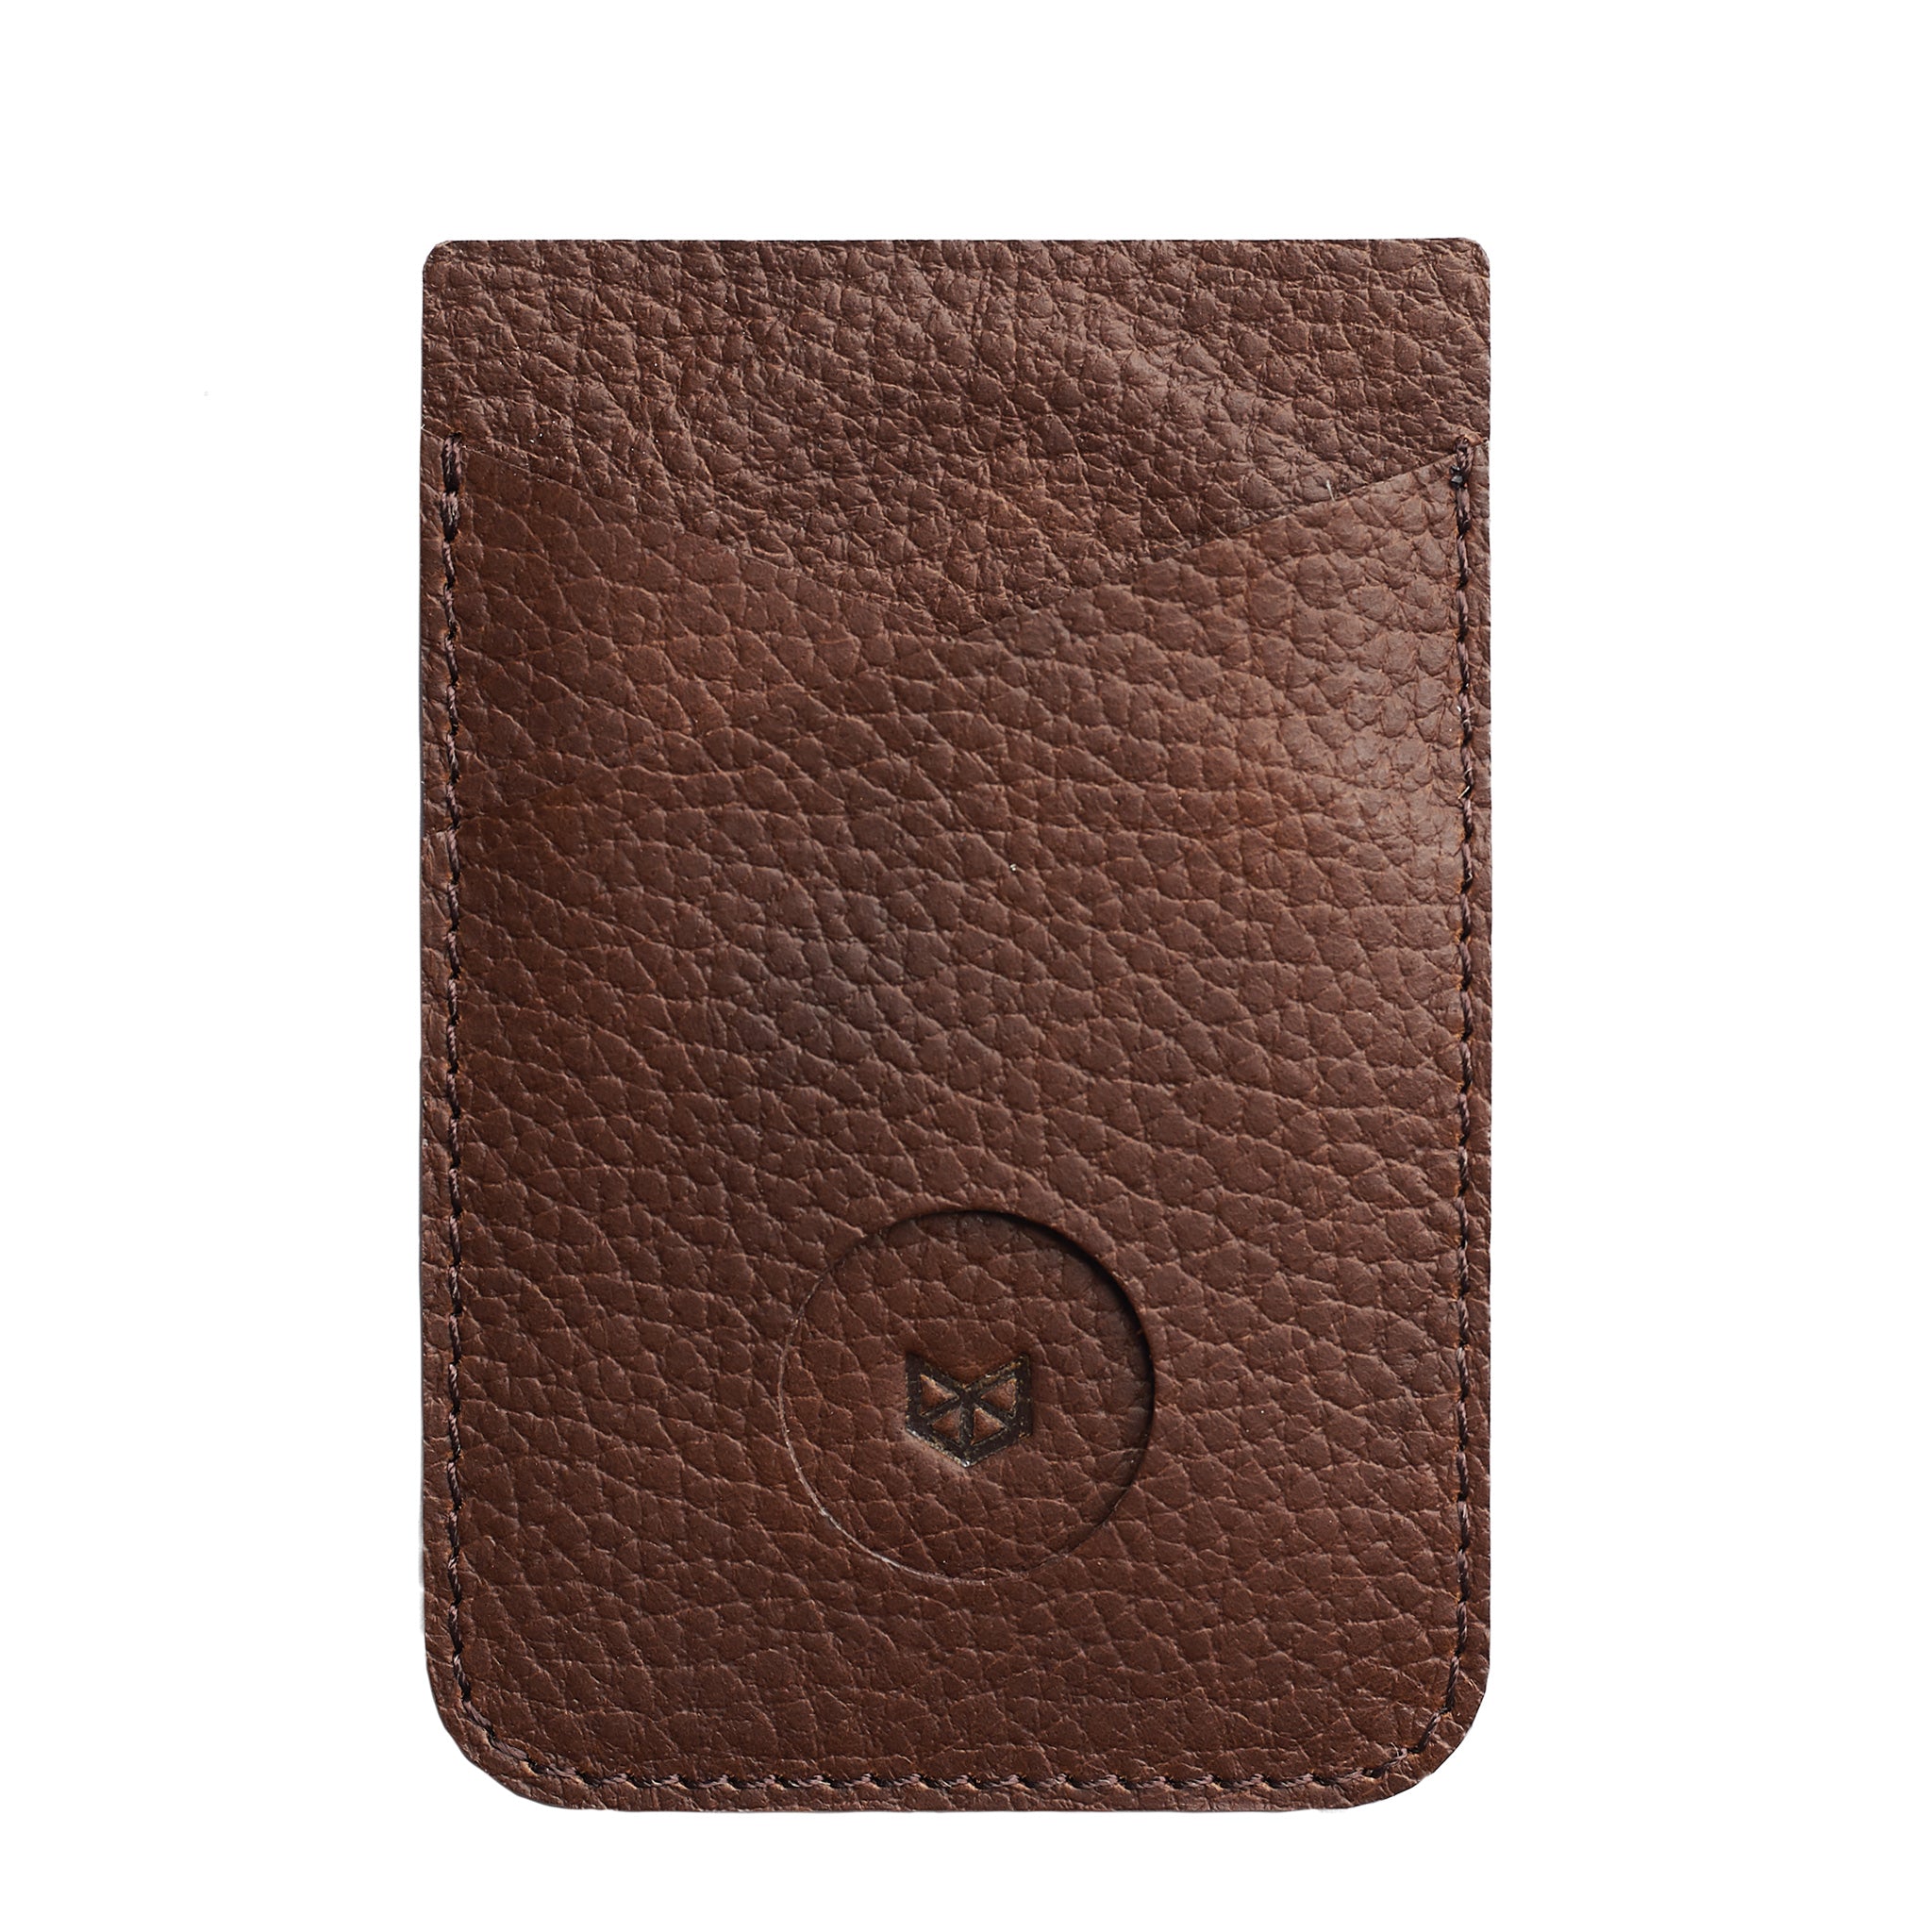 MagSafe iPhone Leather Wallet Card Holder · Brown by Capra Leather